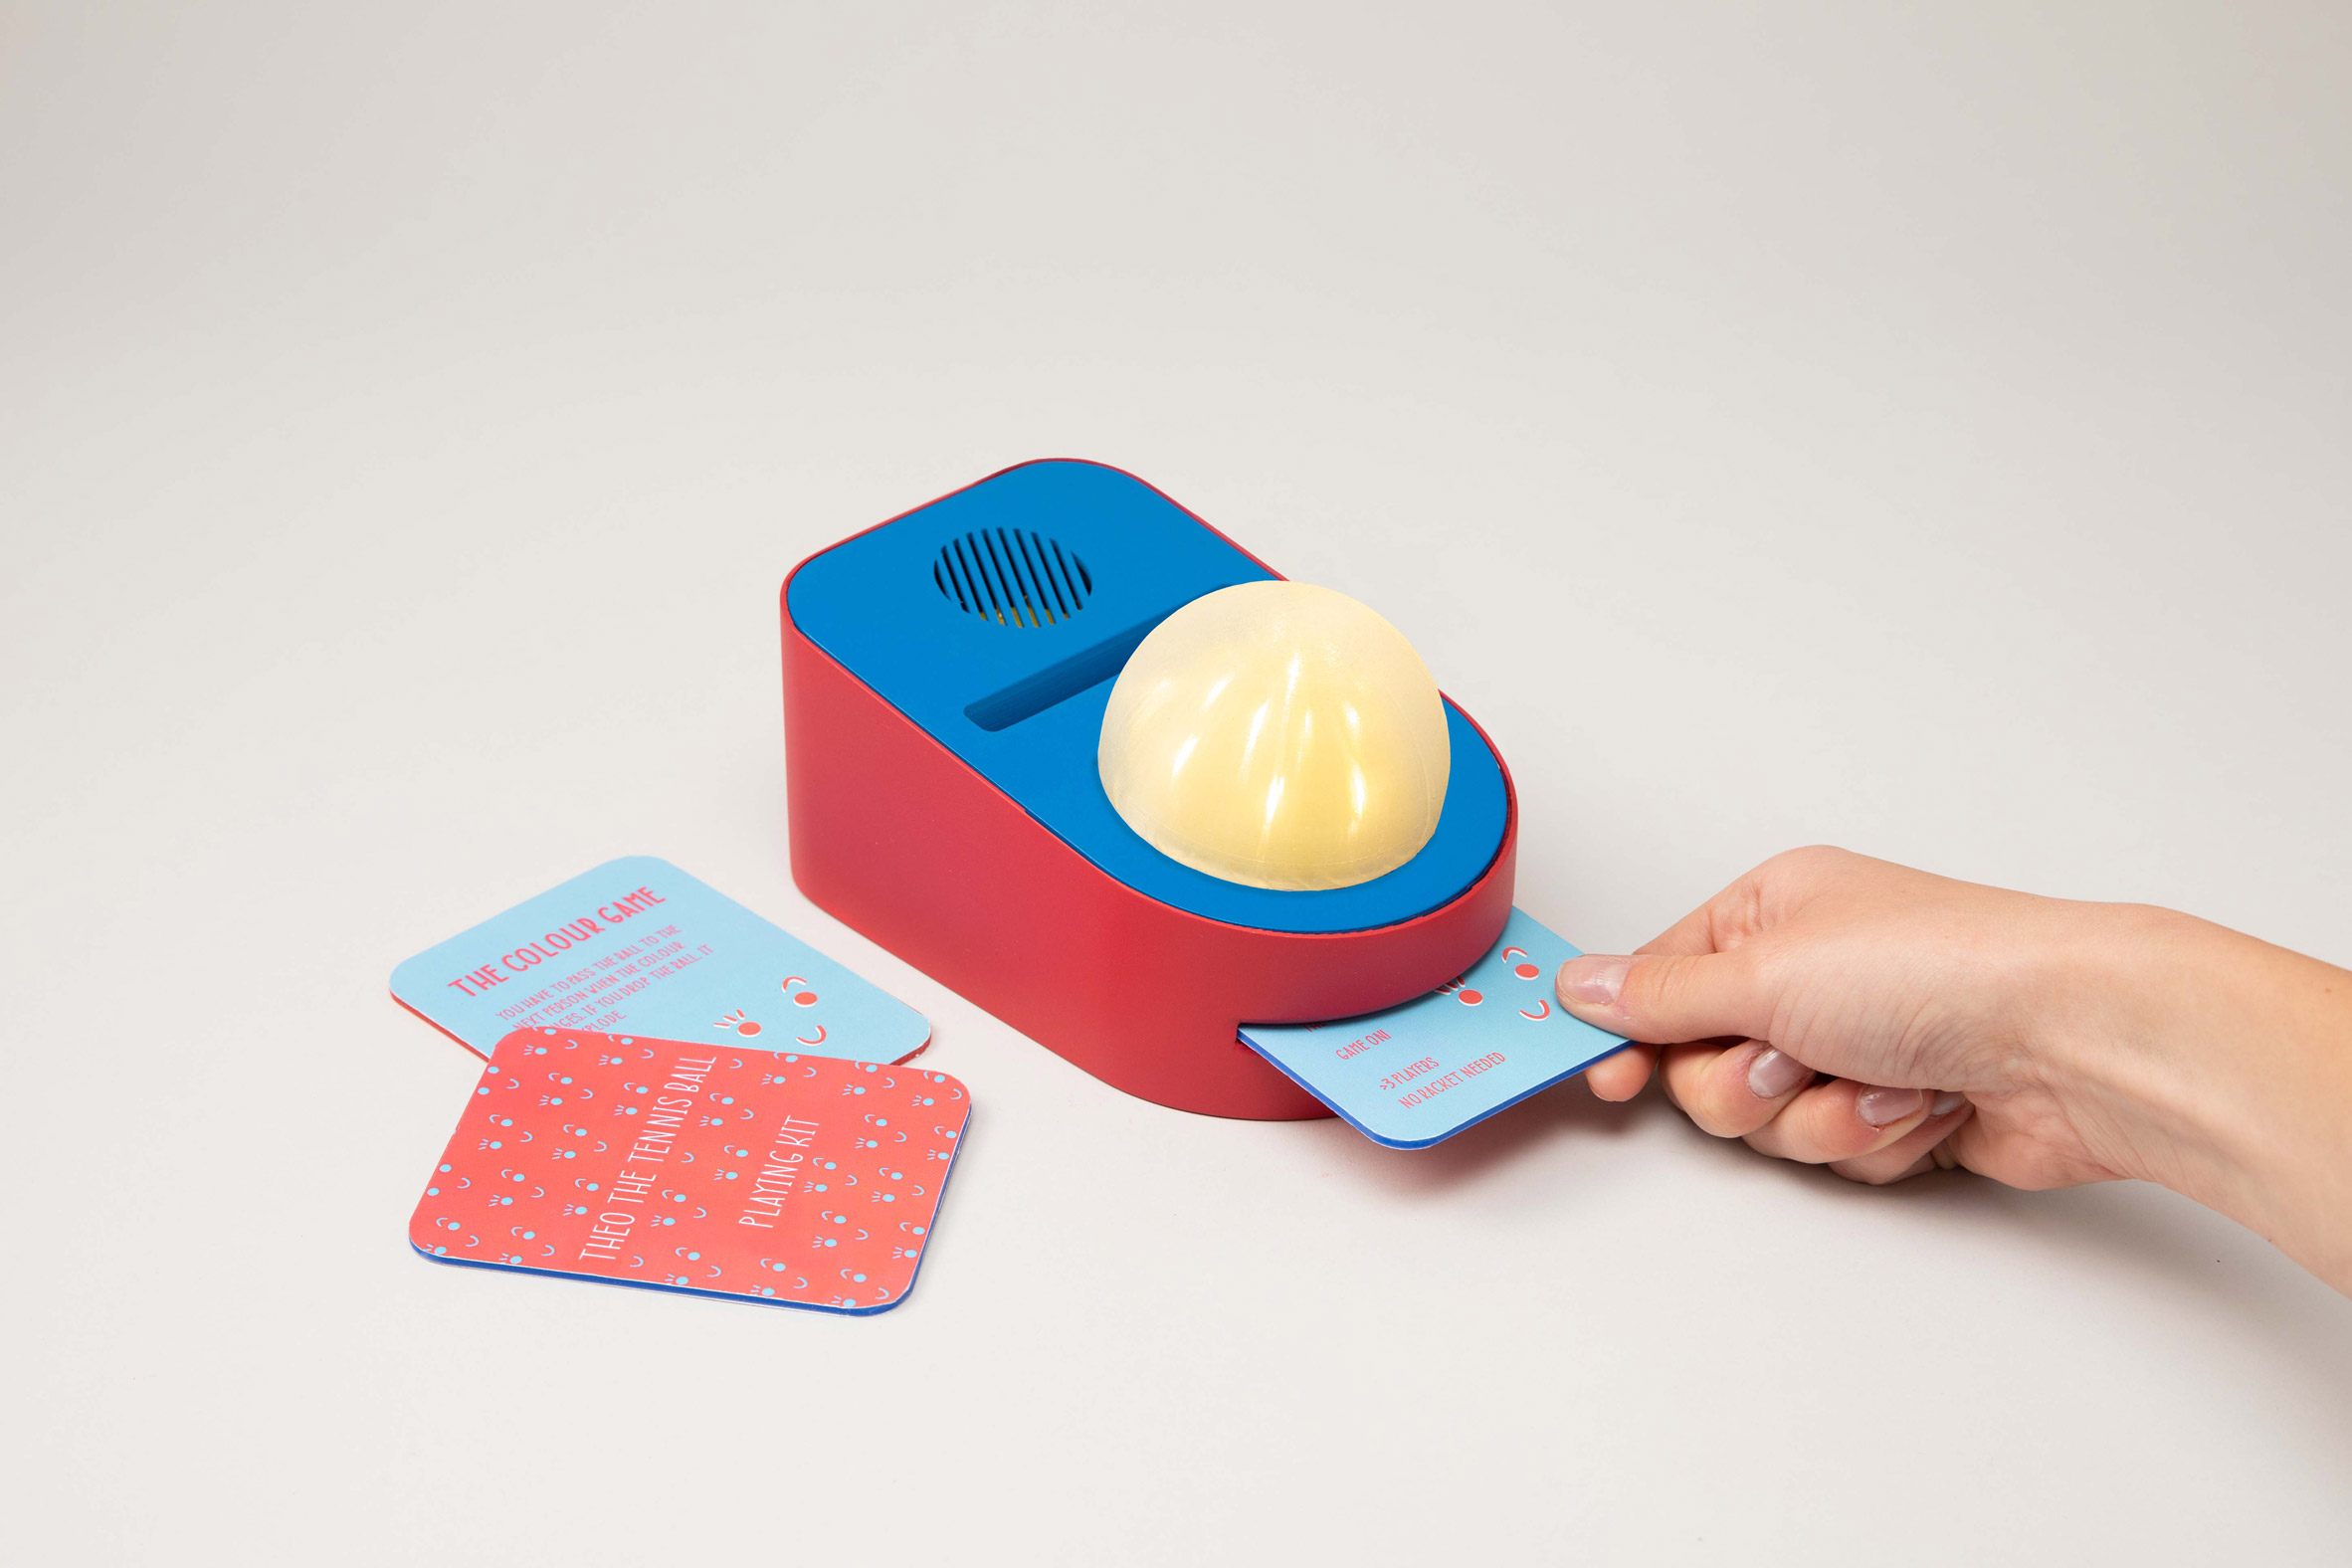 A smart ball and speaker game for children